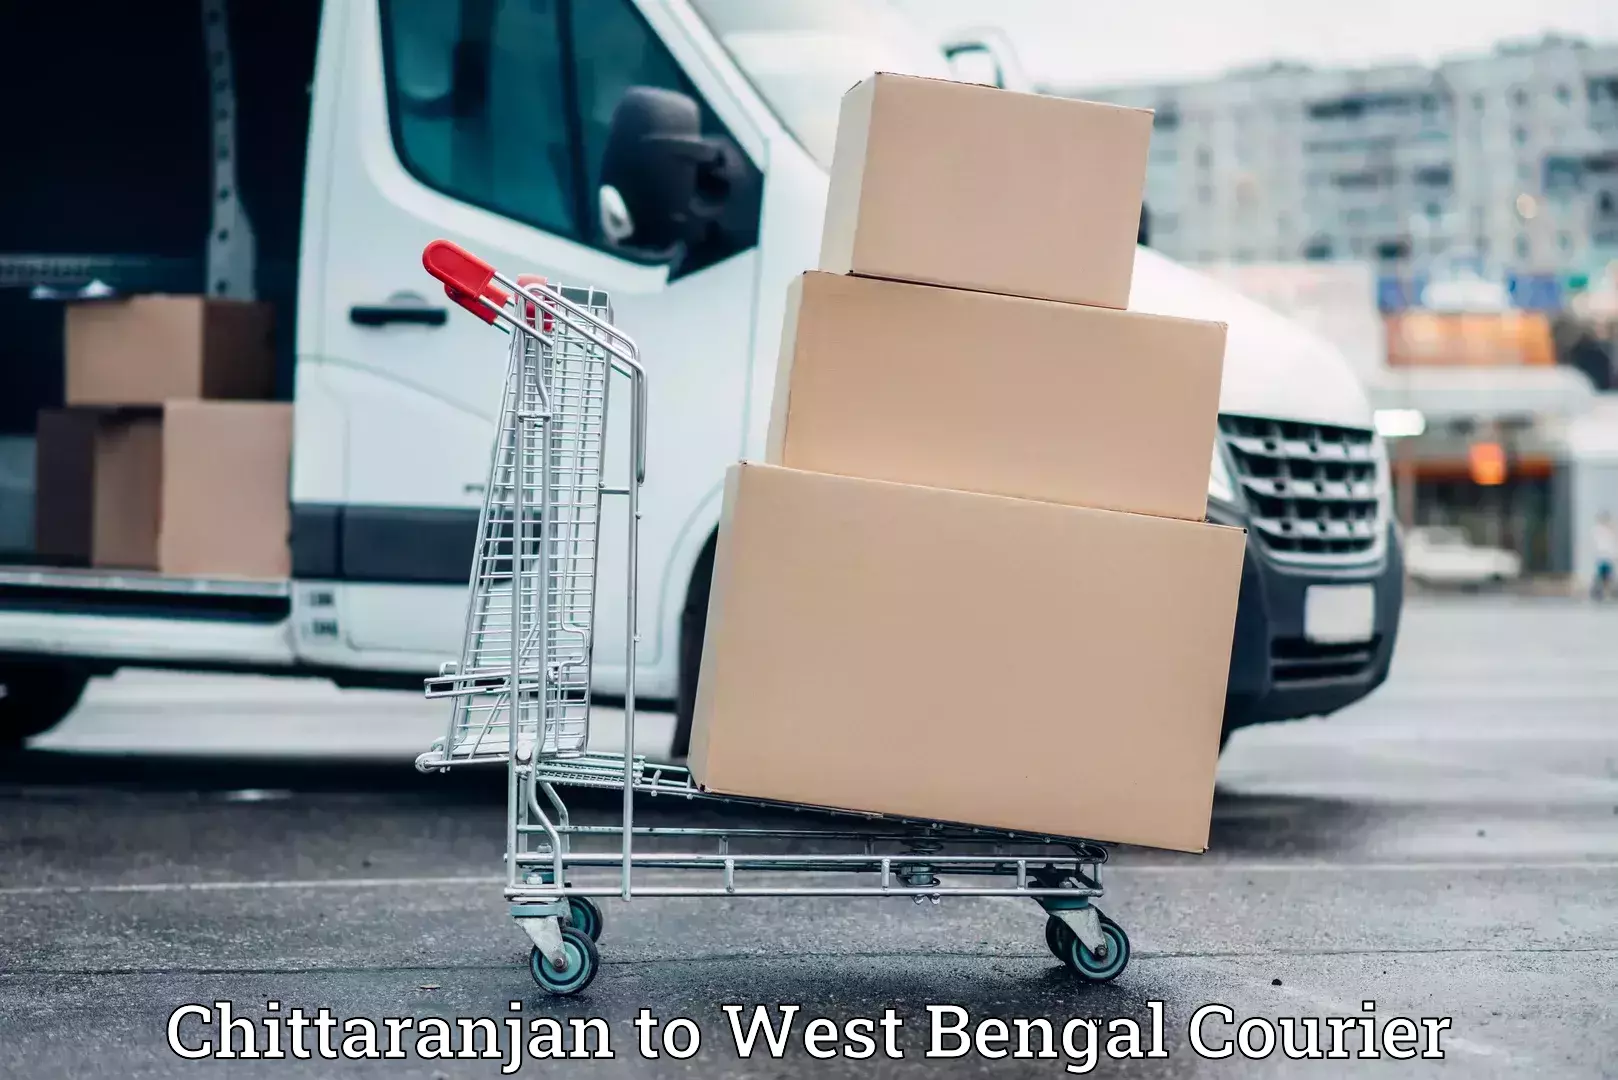 Trusted relocation experts in Chittaranjan to West Bengal